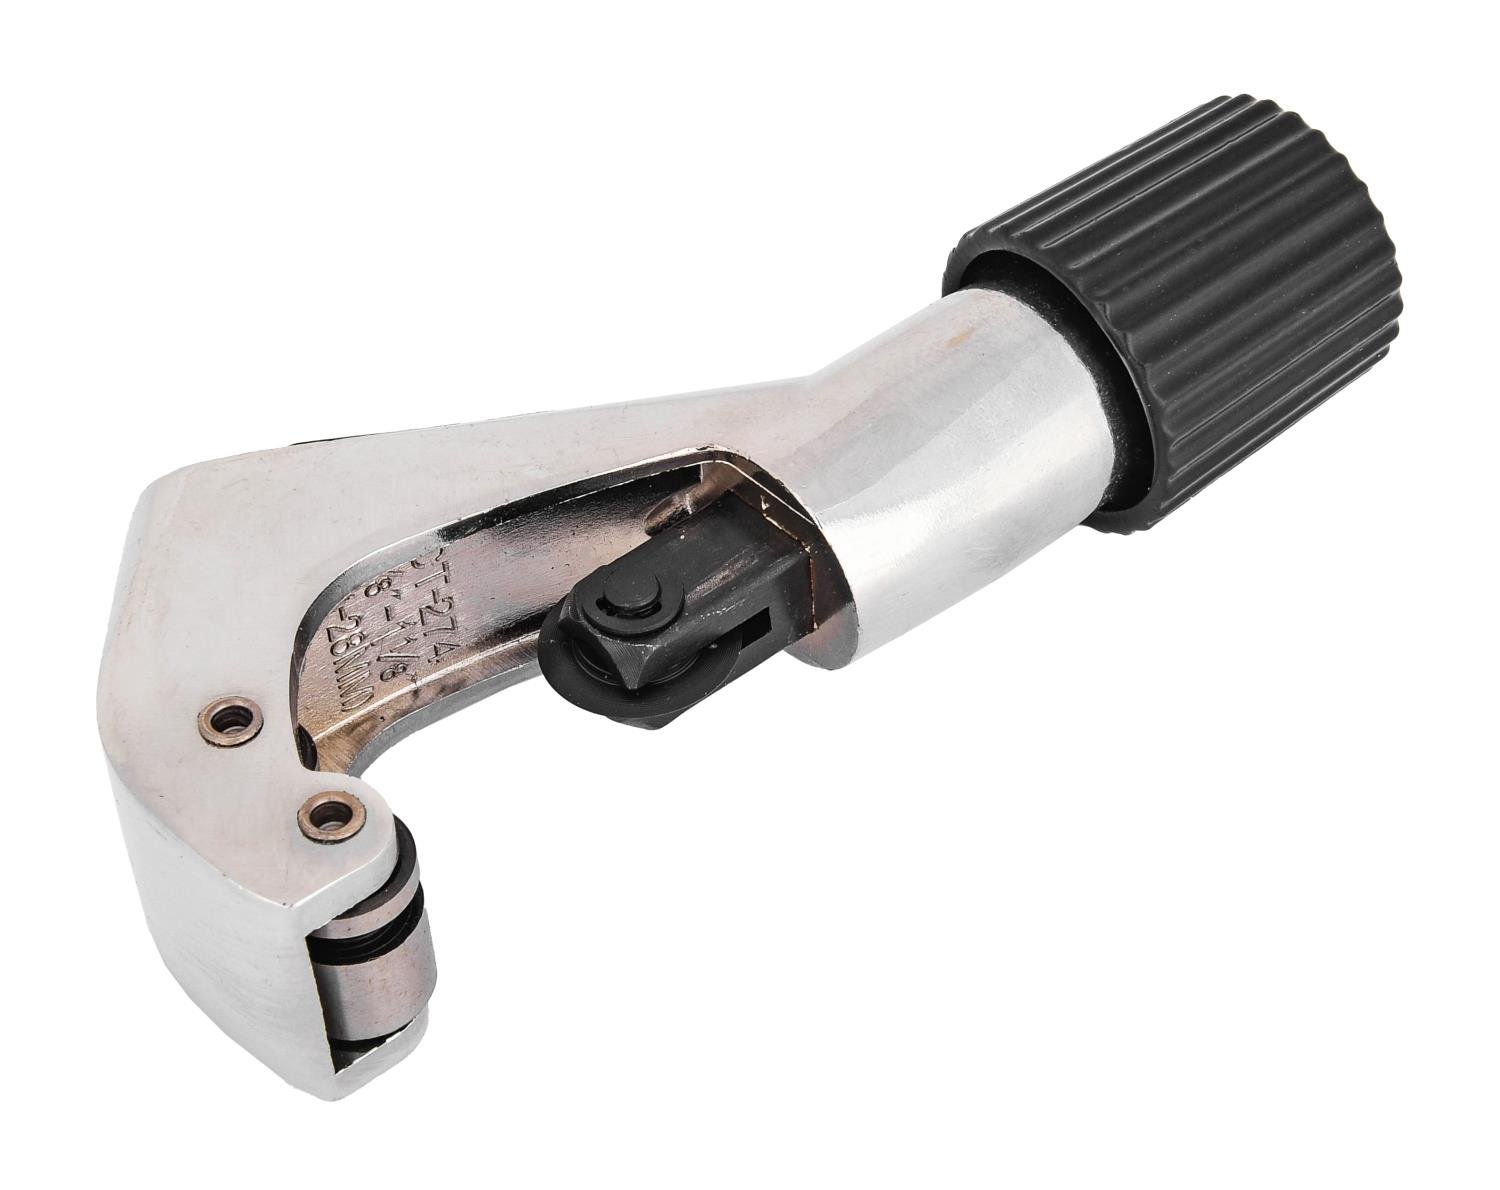 Pro Style Tubing Cutter For 1/8 in.-1 1/8 in. Tubing